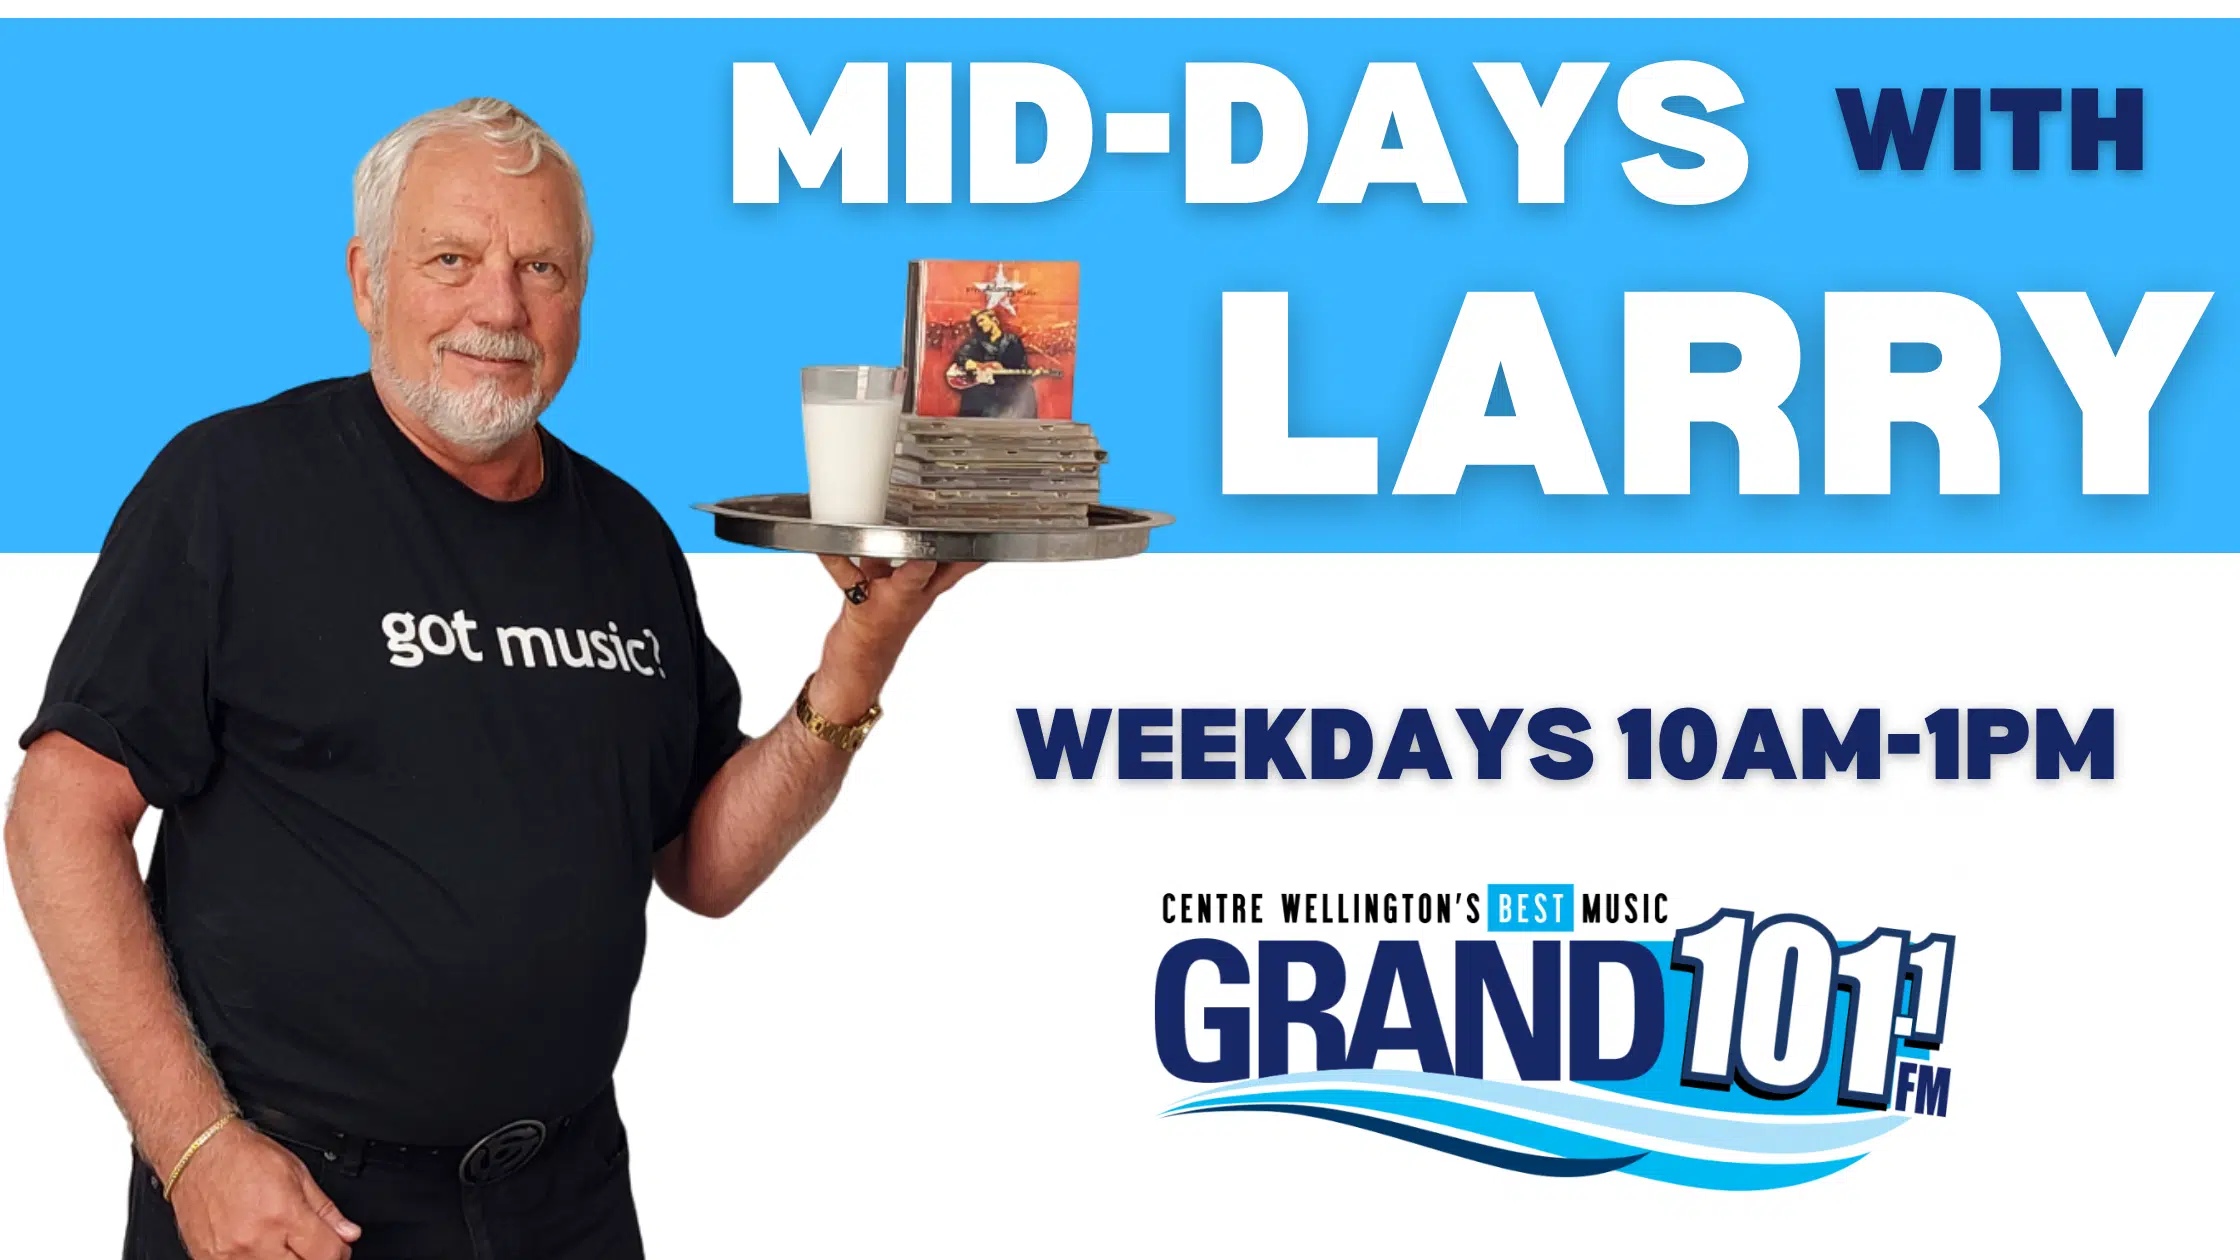 Feature: https://thegrand101.com/mid-days-with-larry-peters/